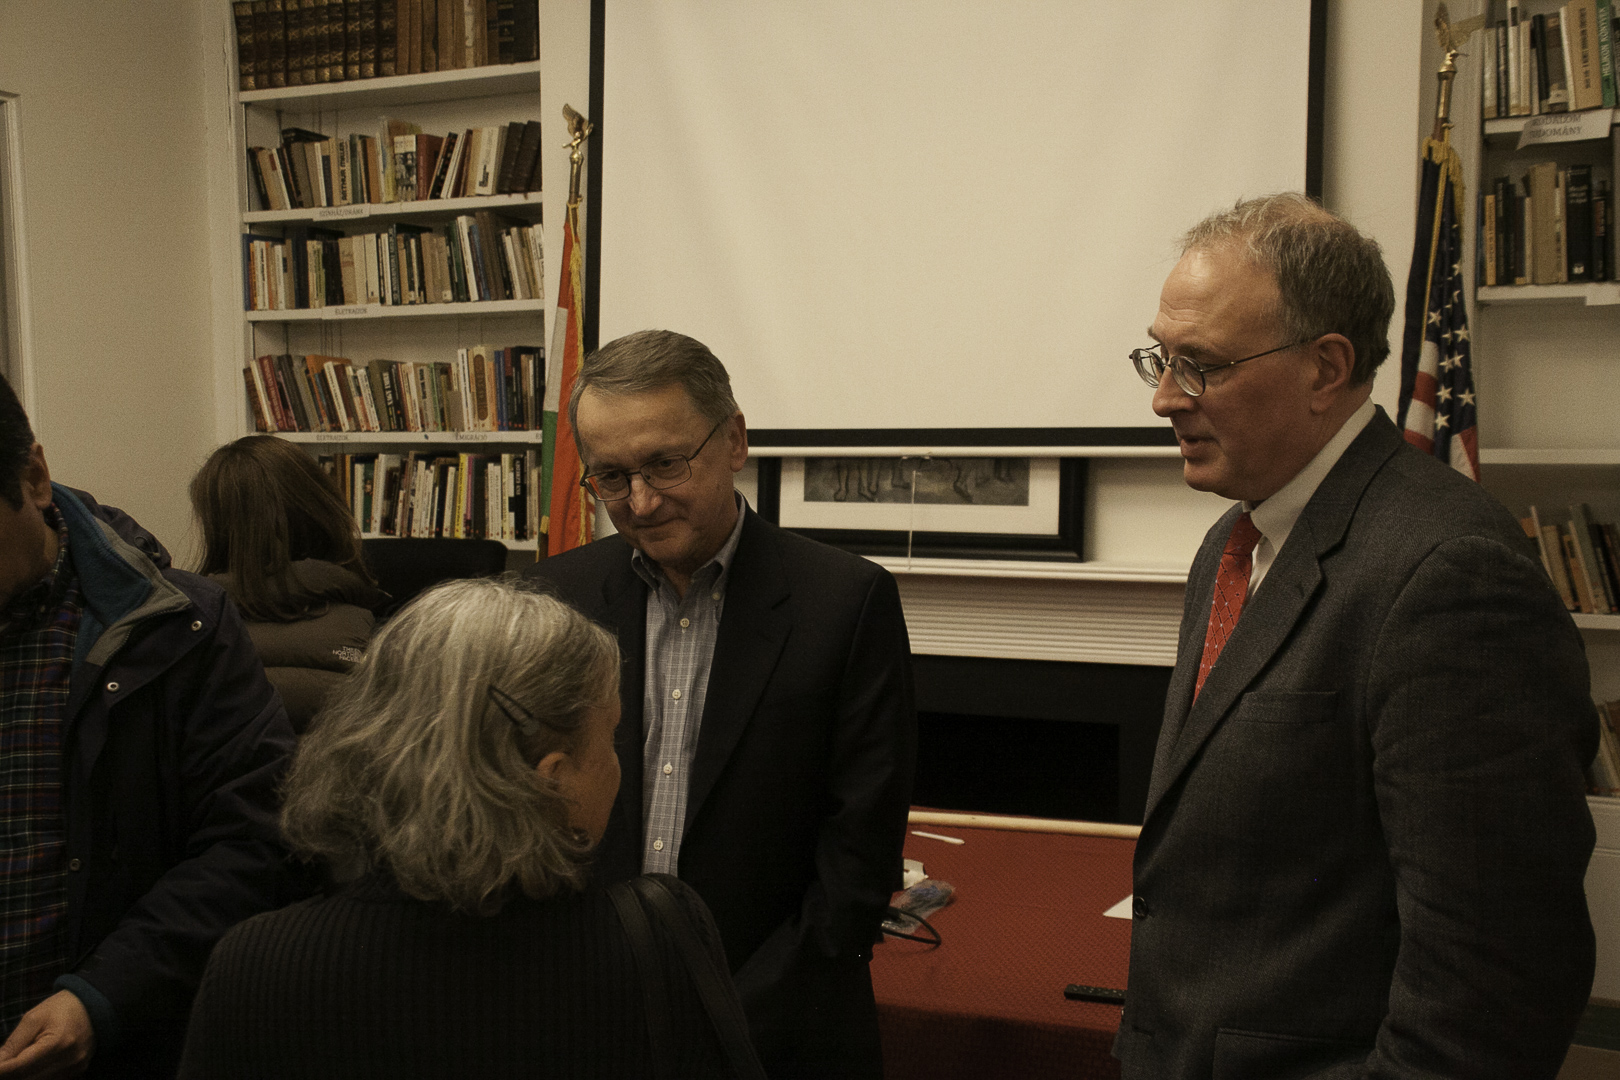 Koszorus event discussing the July 1944 book